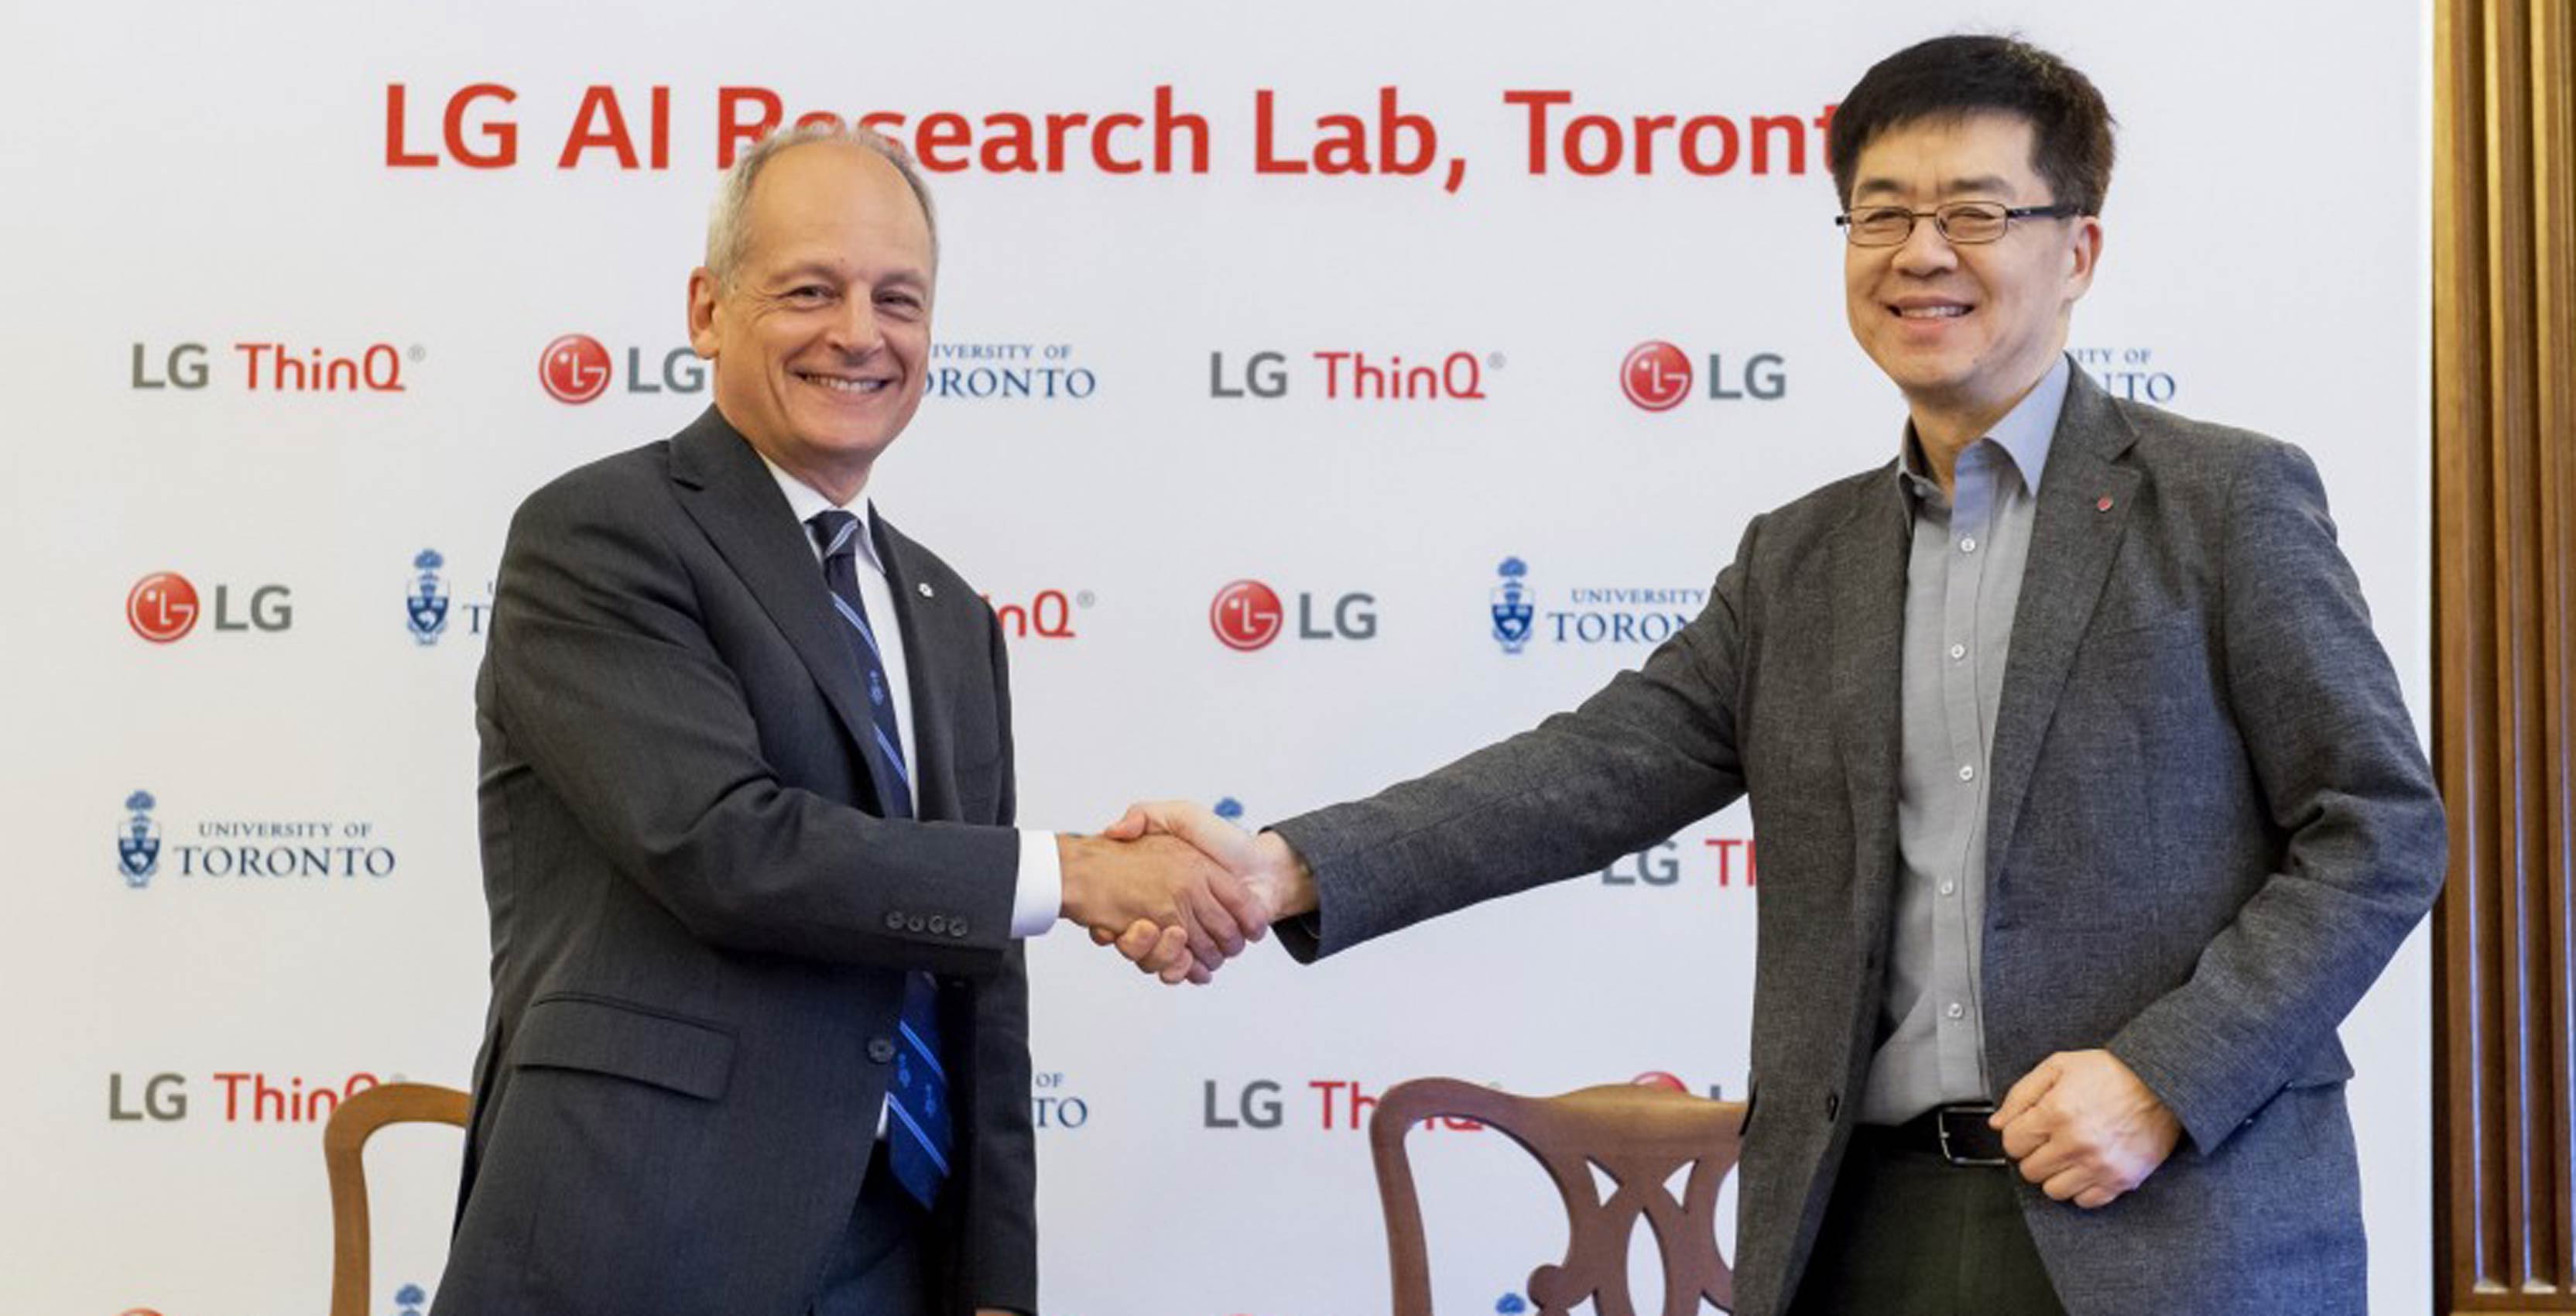 LG's new AI Research Lab at the University of Toronto